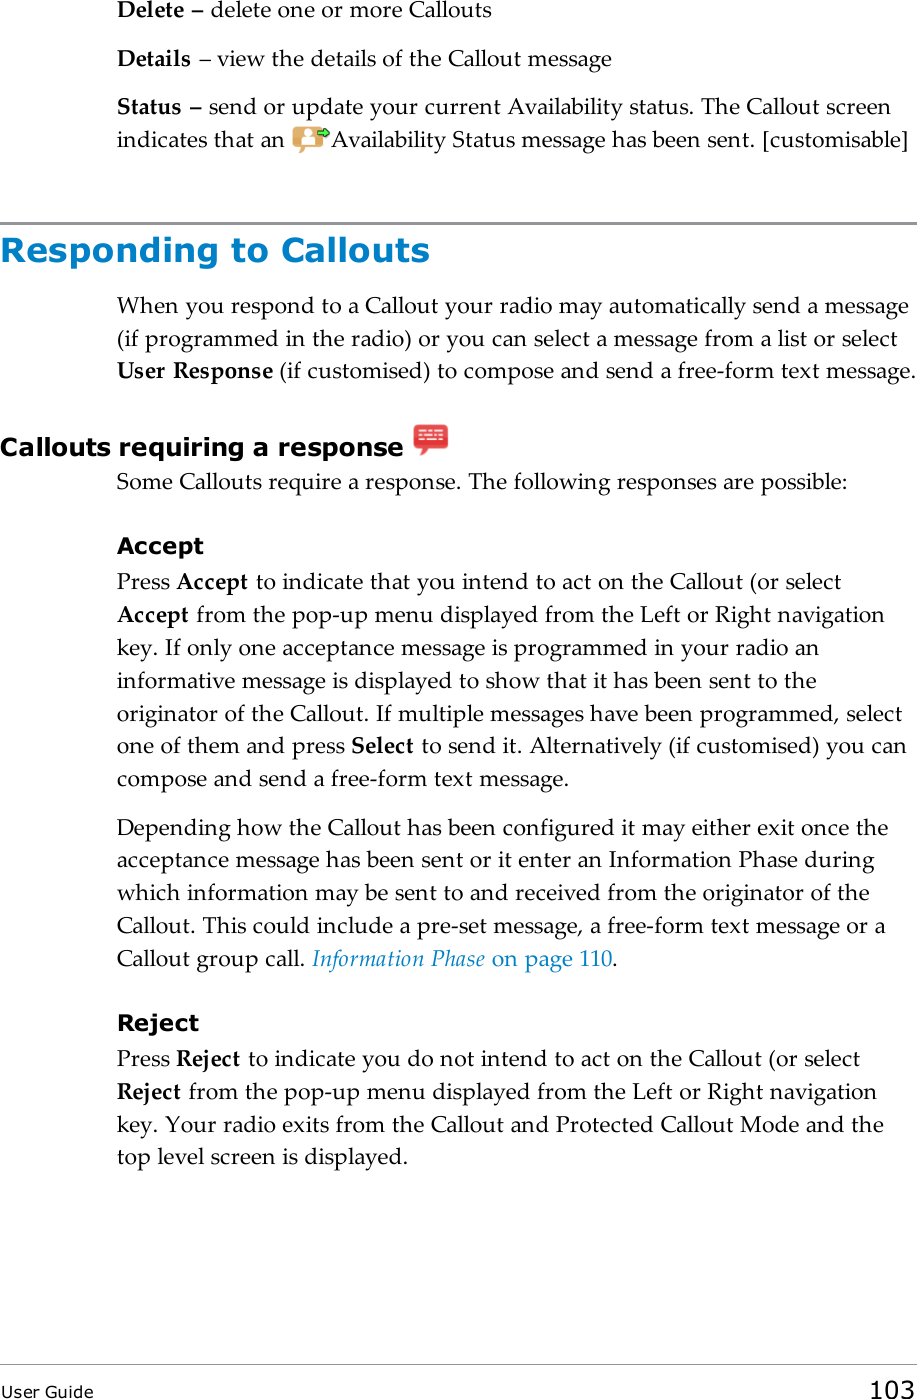 Delete – delete one or more CalloutsDetails – view the details of the Callout messageStatus – send or update your current Availability status. The Callout screenindicates that an Availability Status message has been sent. [customisable]Responding to CalloutsWhen you respond to a Callout your radio may automatically send a message(if programmed in the radio) or you can select a message from a list or selectUser Response (if customised) to compose and send a free-form text message.Callouts requiring a responseSome Callouts require a response. The following responses are possible:AcceptPress Accept to indicate that you intend to act on the Callout (or selectAccept from the pop-up menu displayed from the Left or Right navigationkey. If only one acceptance message is programmed in your radio aninformative message is displayed to show that it has been sent to theoriginator of the Callout. If multiple messages have been programmed, selectone of them and press Select to send it. Alternatively (if customised) you cancompose and send a free-form text message.Depending how the Callout has been configured it may either exit once theacceptance message has been sent or it enter an Information Phase duringwhich information may be sent to and received from the originator of theCallout. This could include a pre-set message, a free-form text message or aCallout group call. Information Phase on page110.RejectPress Reject to indicate you do not intend to act on the Callout (or selectReject from the pop-up menu displayed from the Left or Right navigationkey. Your radio exits from the Callout and Protected Callout Mode and thetop level screen is displayed.User Guide 103